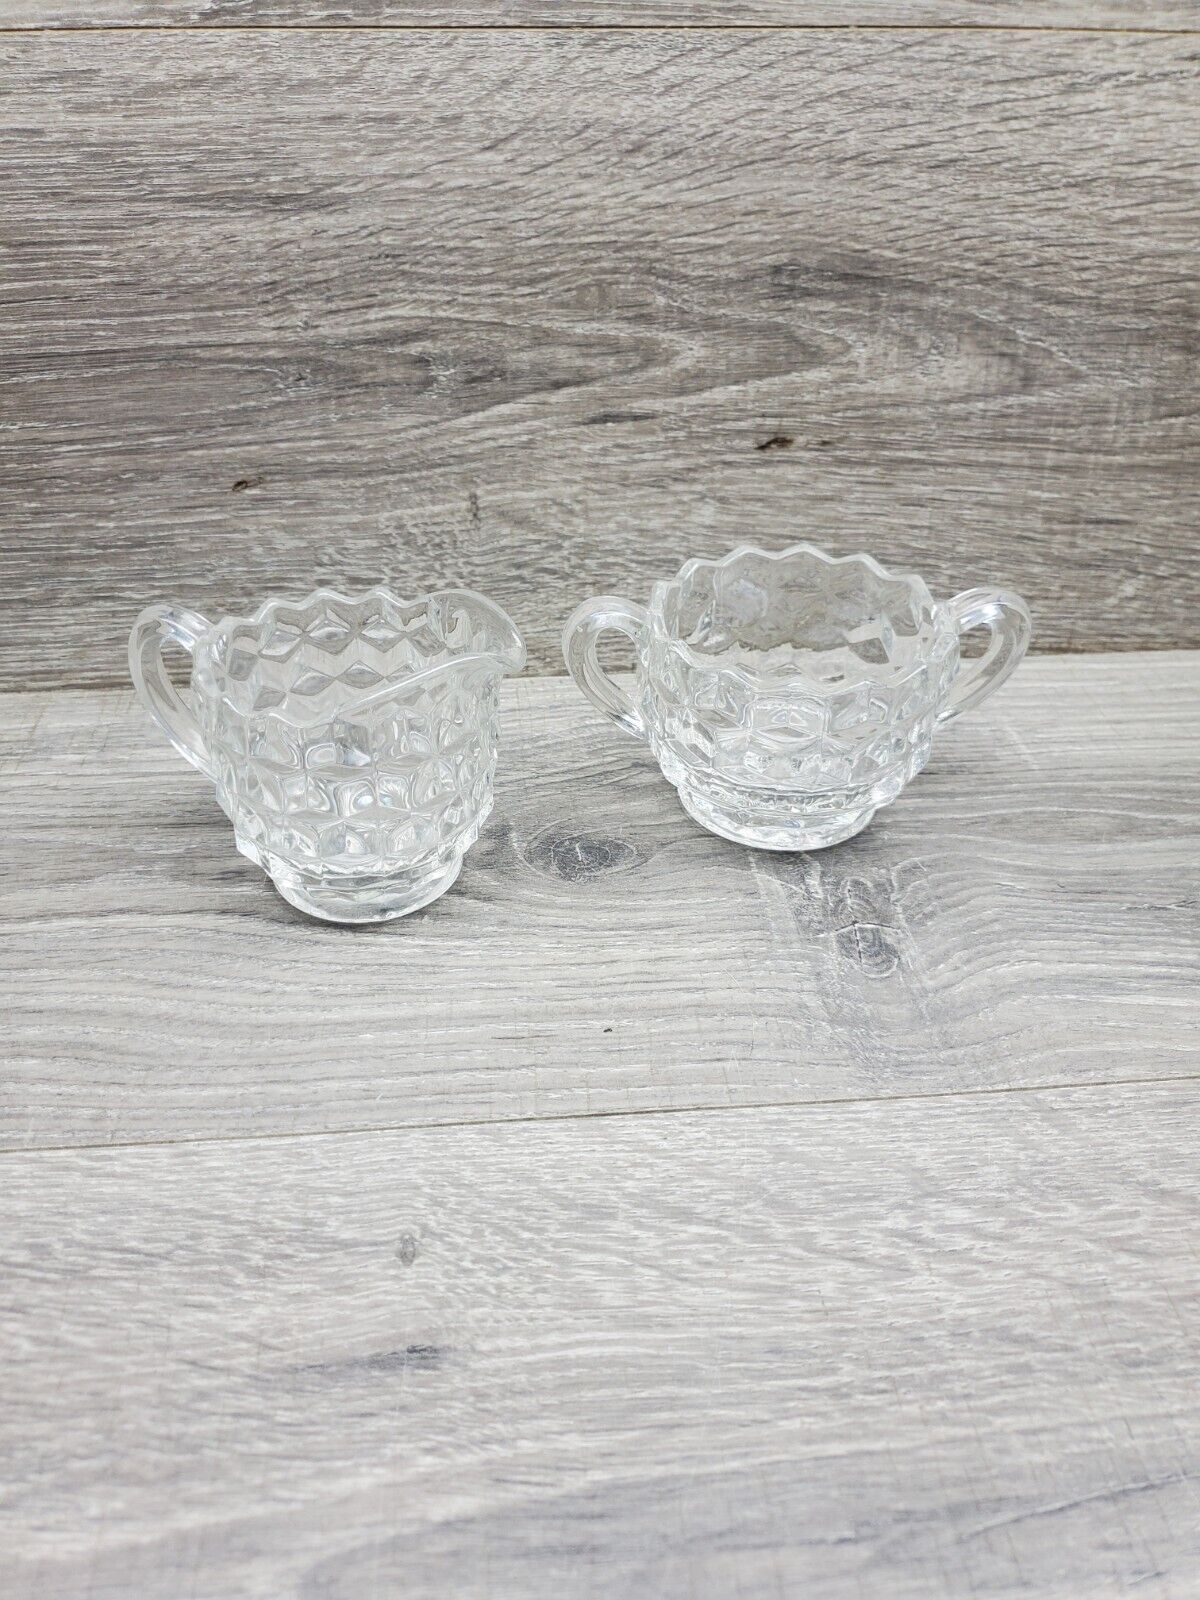 Vintage Fostoria Glass American Clear Open Sugar Bowl with Handles And Creamer 